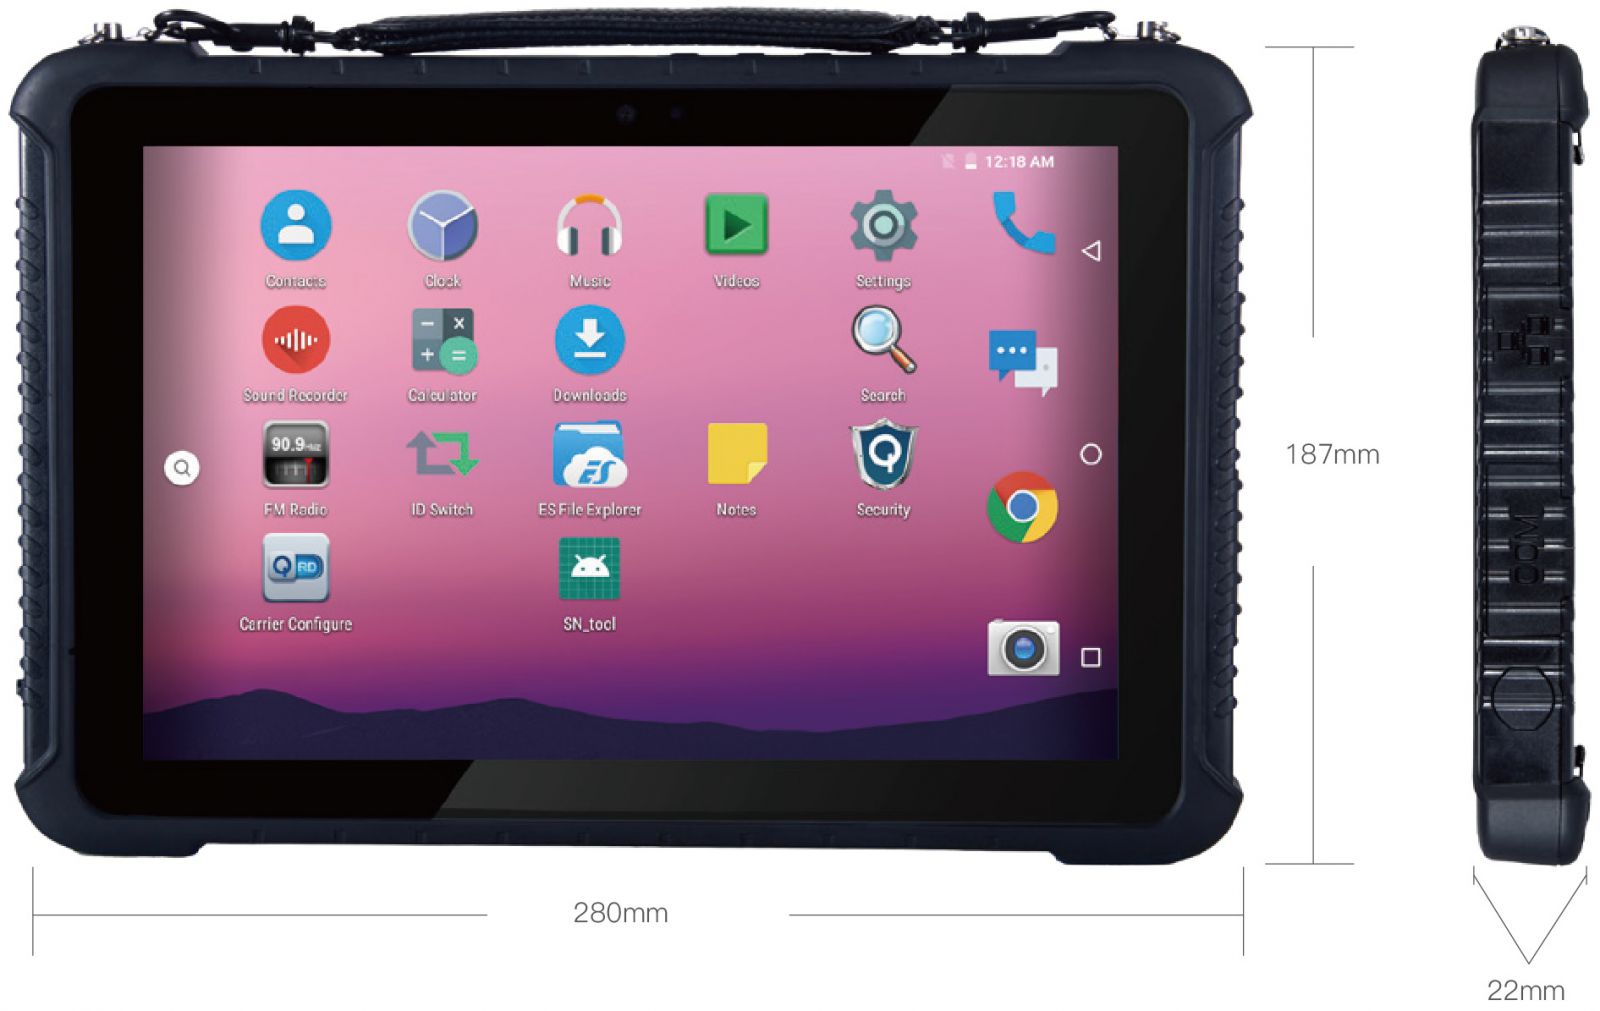 Industrial 10 inch tablet with Android 9.0, 4GB RAM memory, 64GB ROM, 4G and NFC disk - Emdoor Q16 v.1 